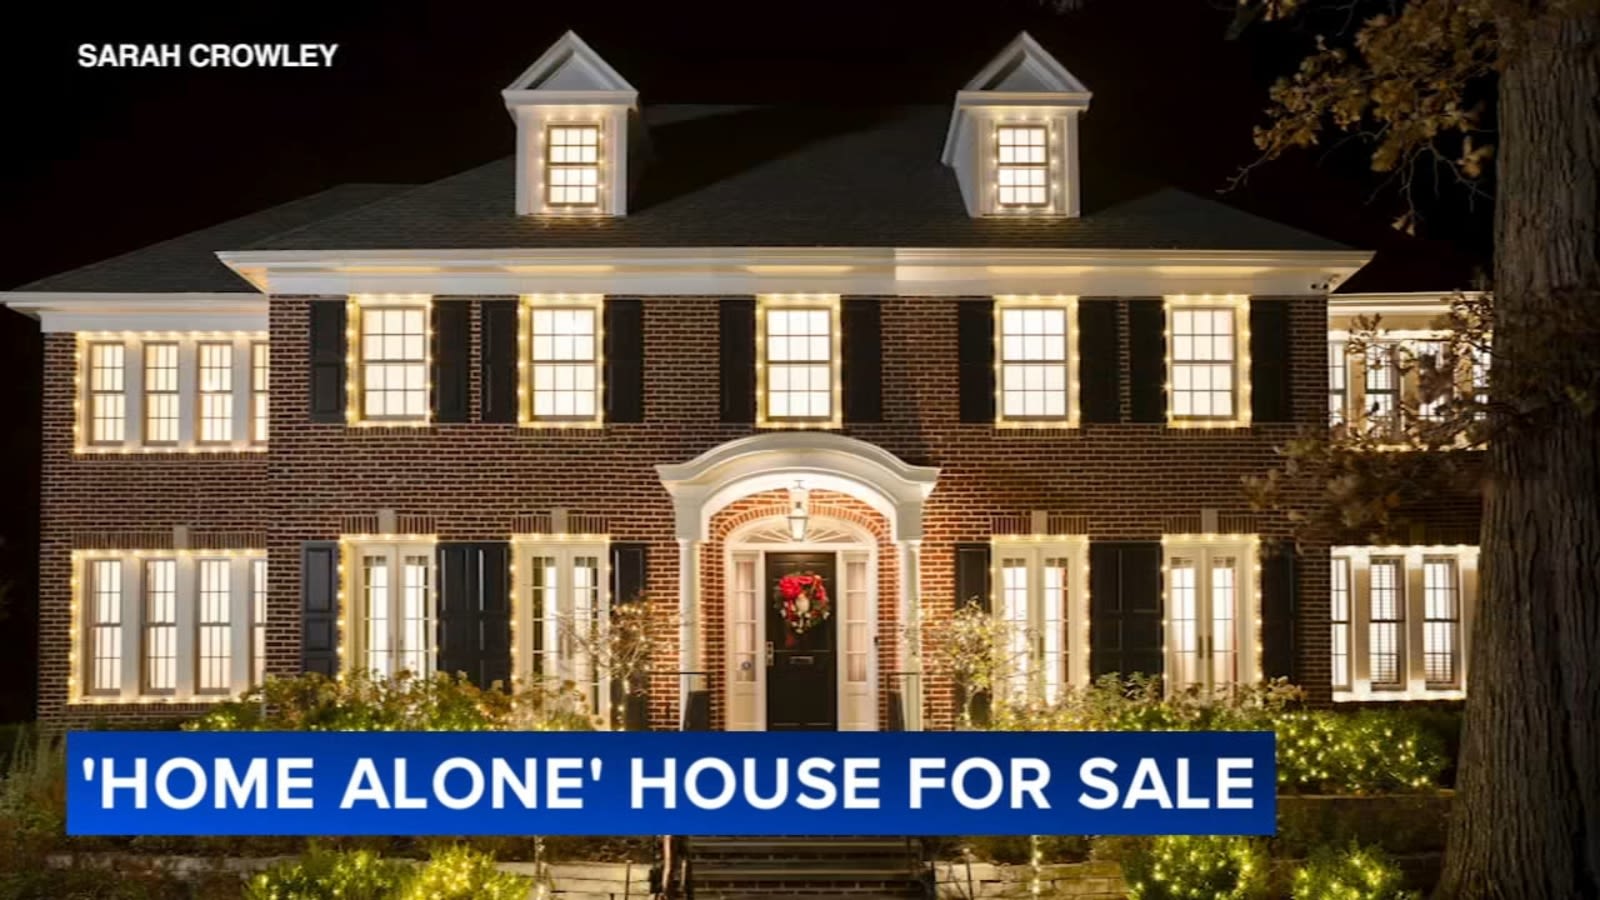 'Home Alone' house for sale: Home from 1990 movie listed on market for $5.25M